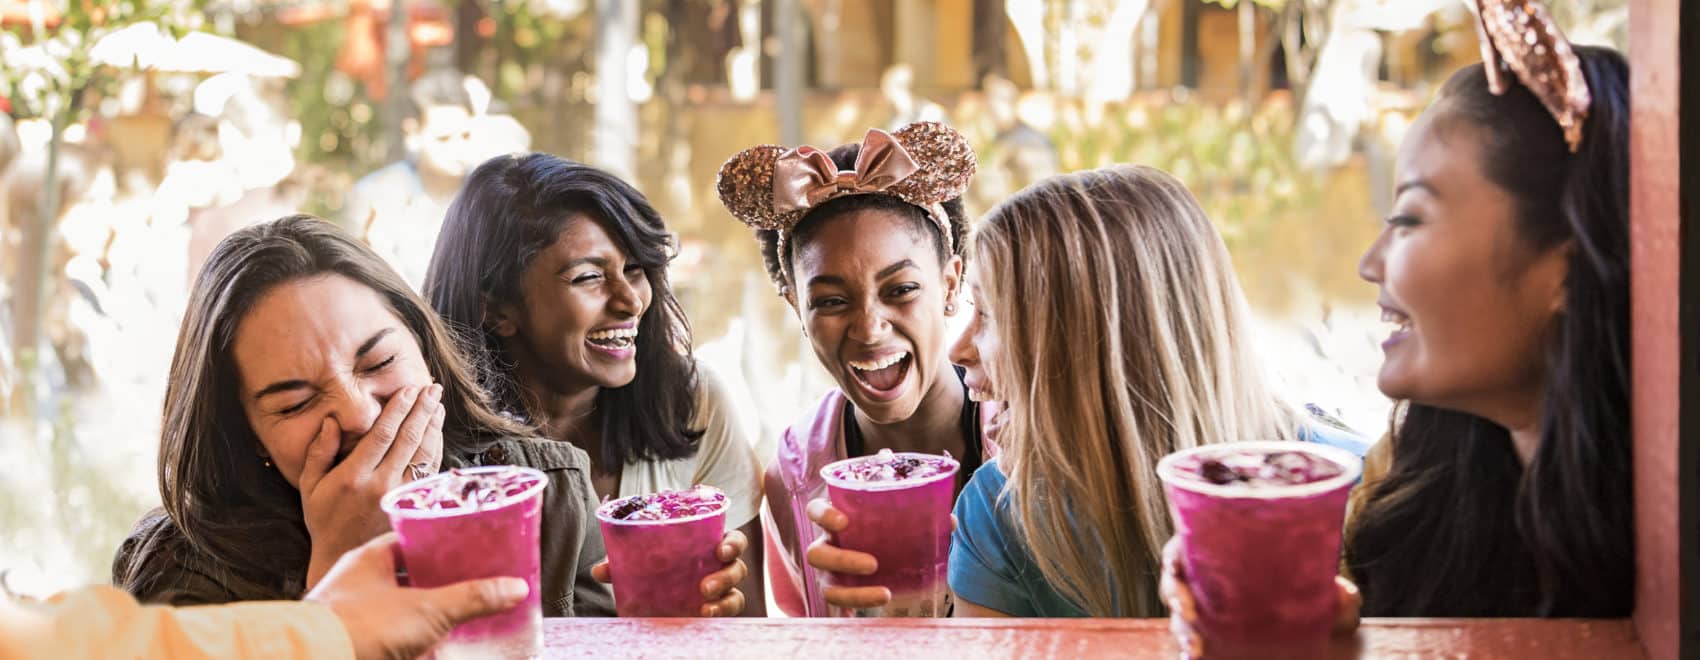 Enjoy An Adults-Only Trip To Disneyland and California Adventure